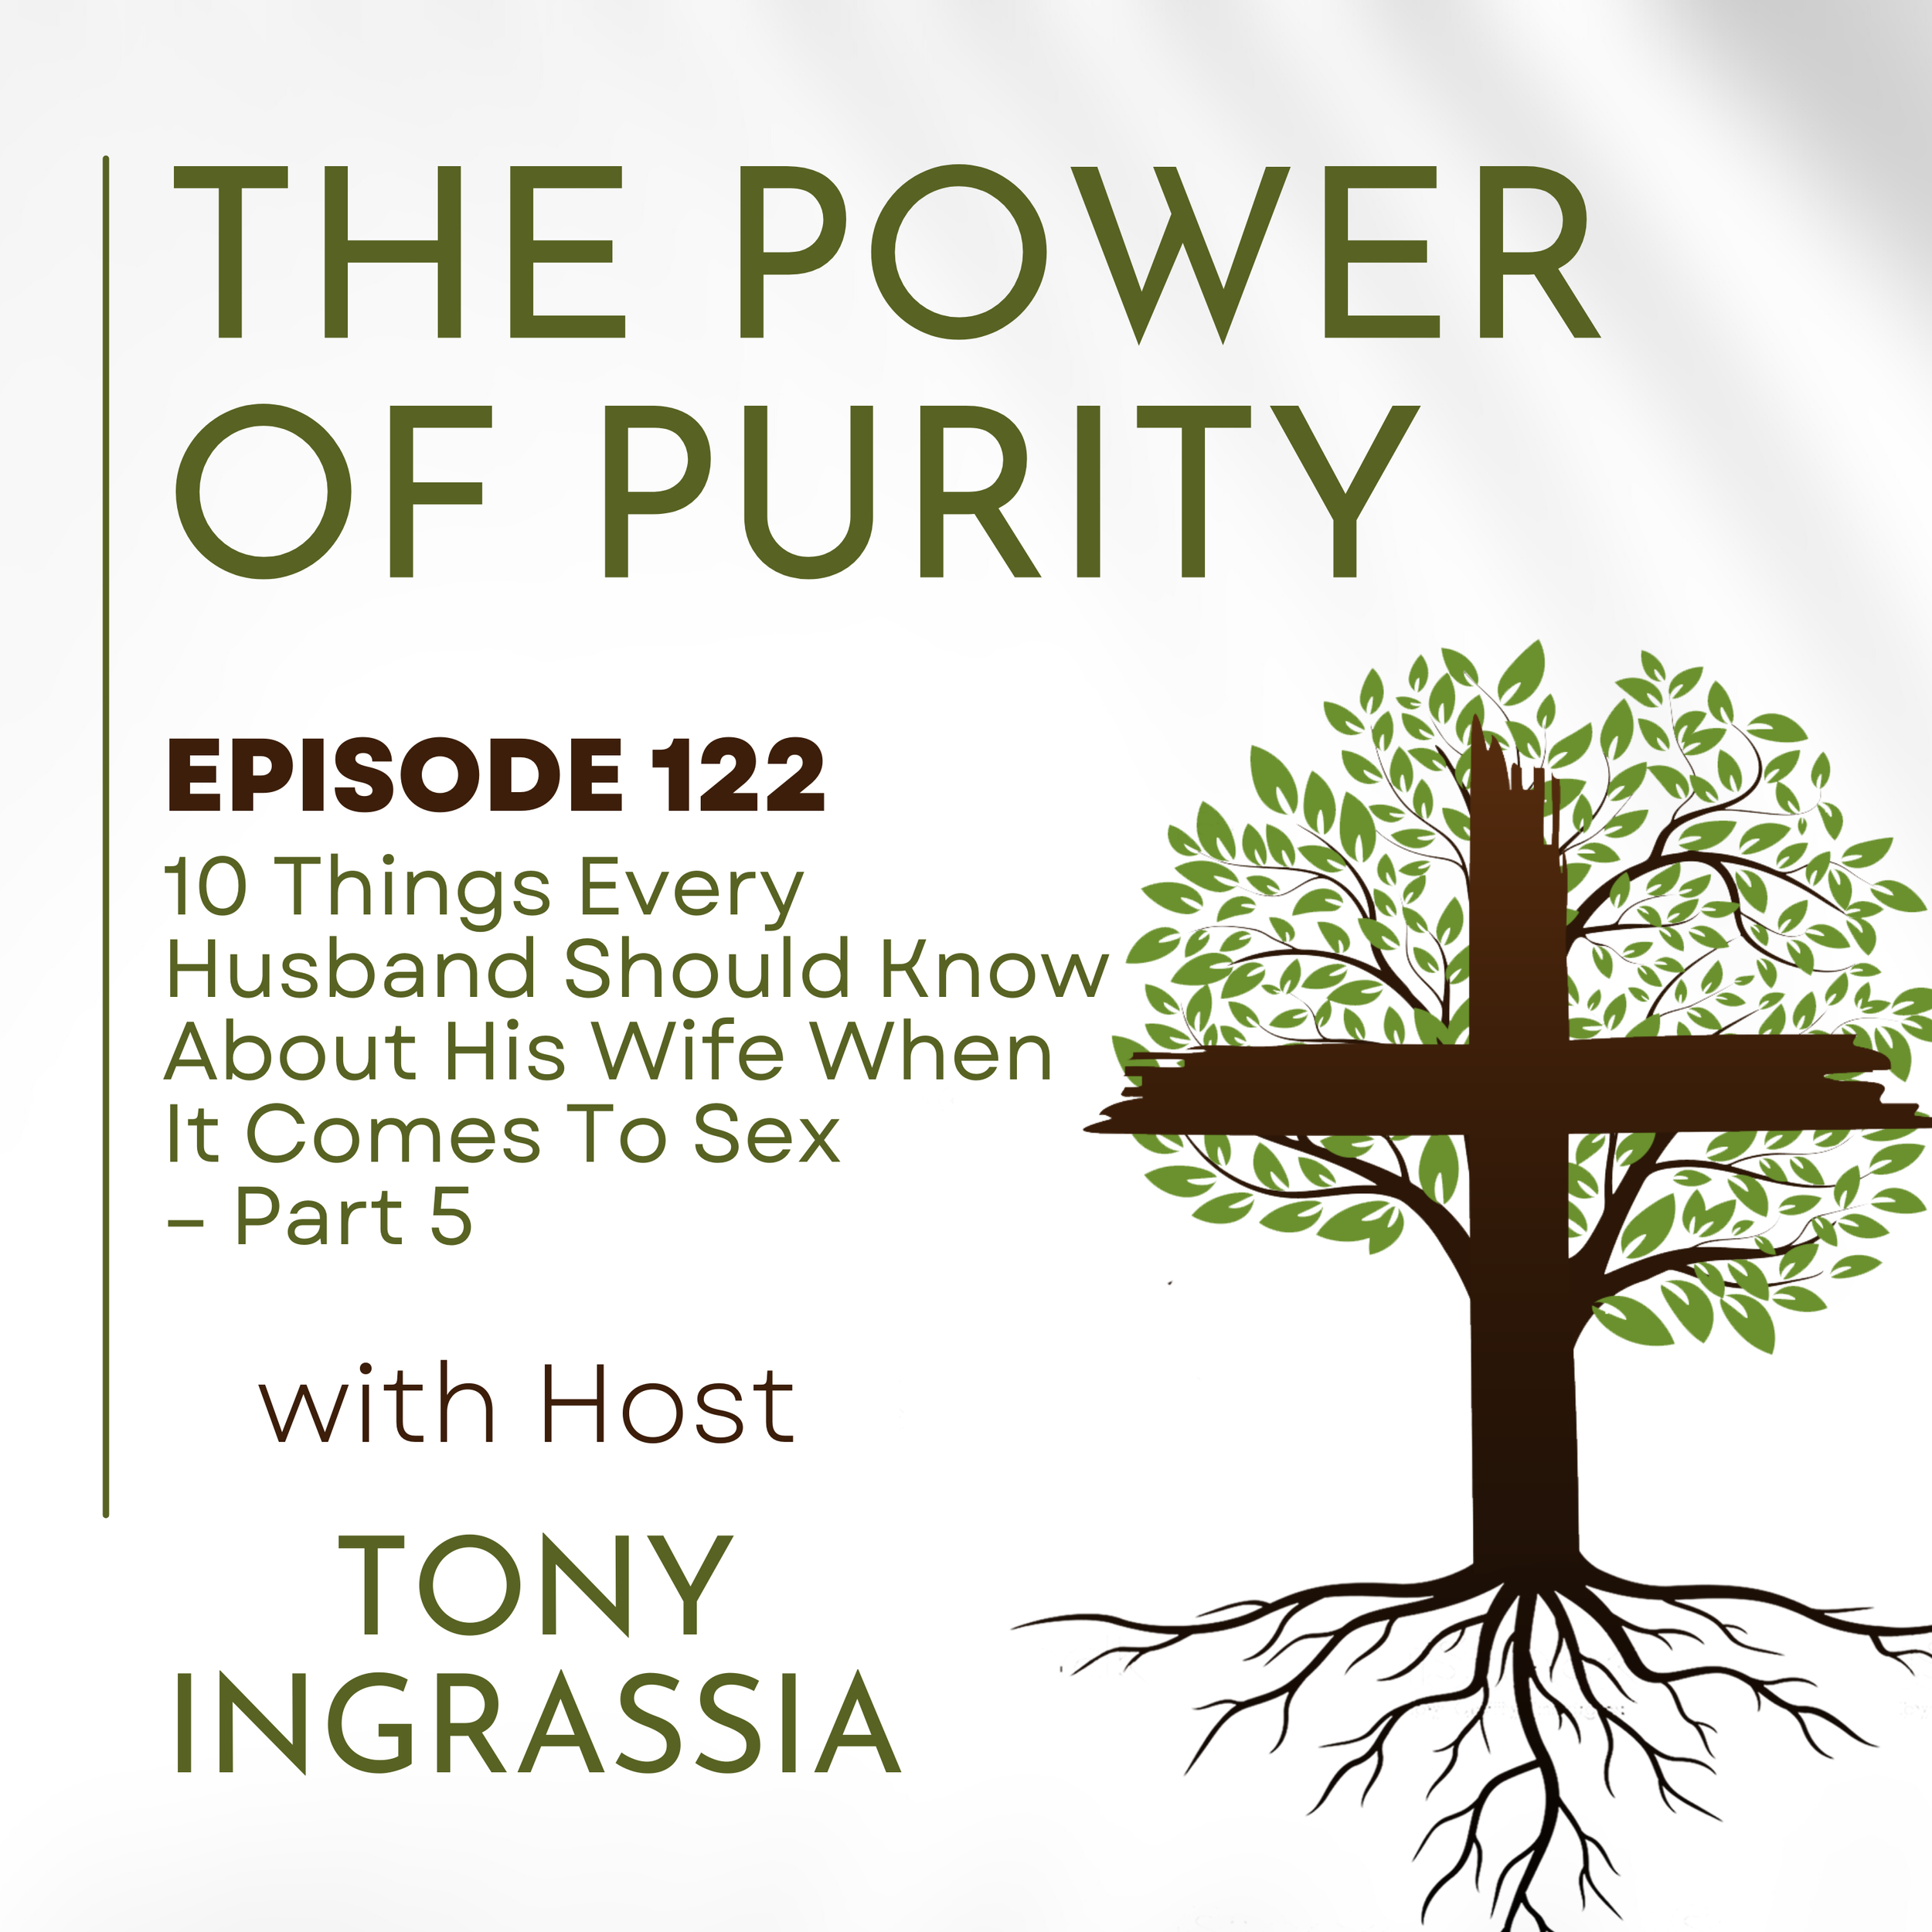 The Power of Purity Podcast, Episode 122 - 10 Things Every Husband Should Know About His Wife When It Comes To